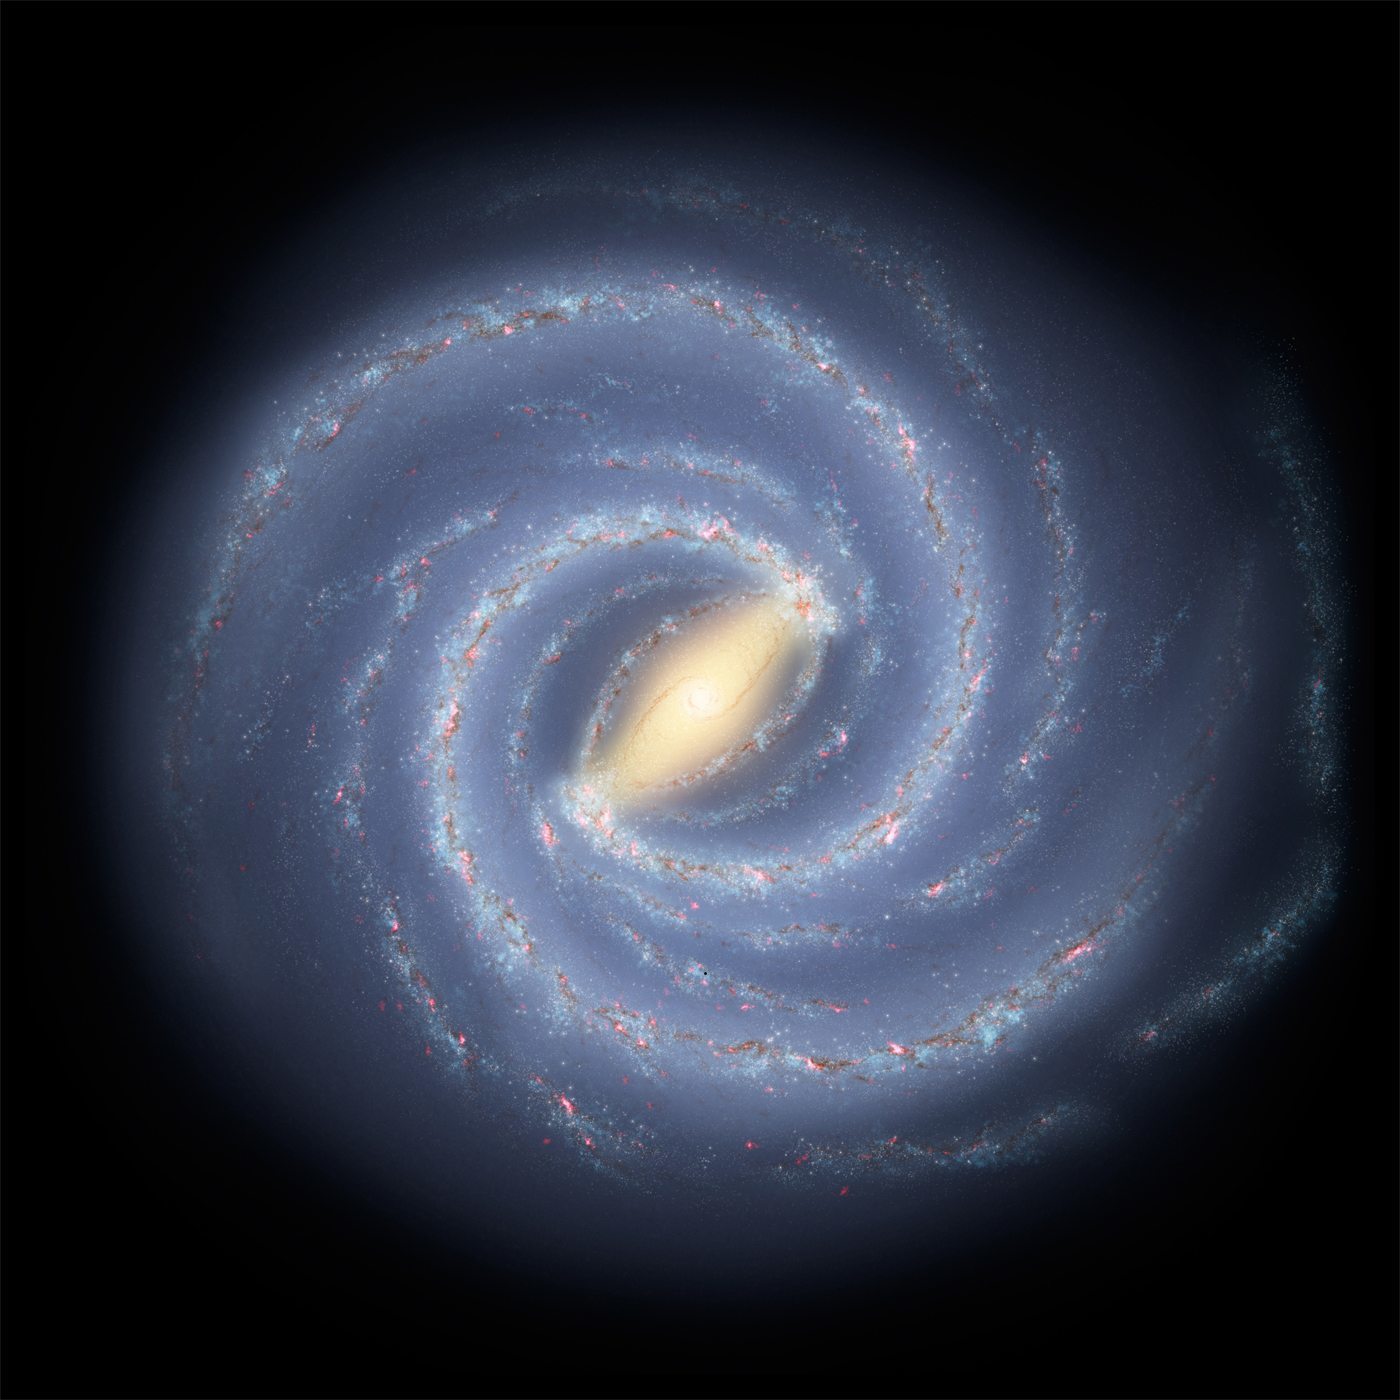 Earth represented as a tiny dot in the Milky Way galaxy